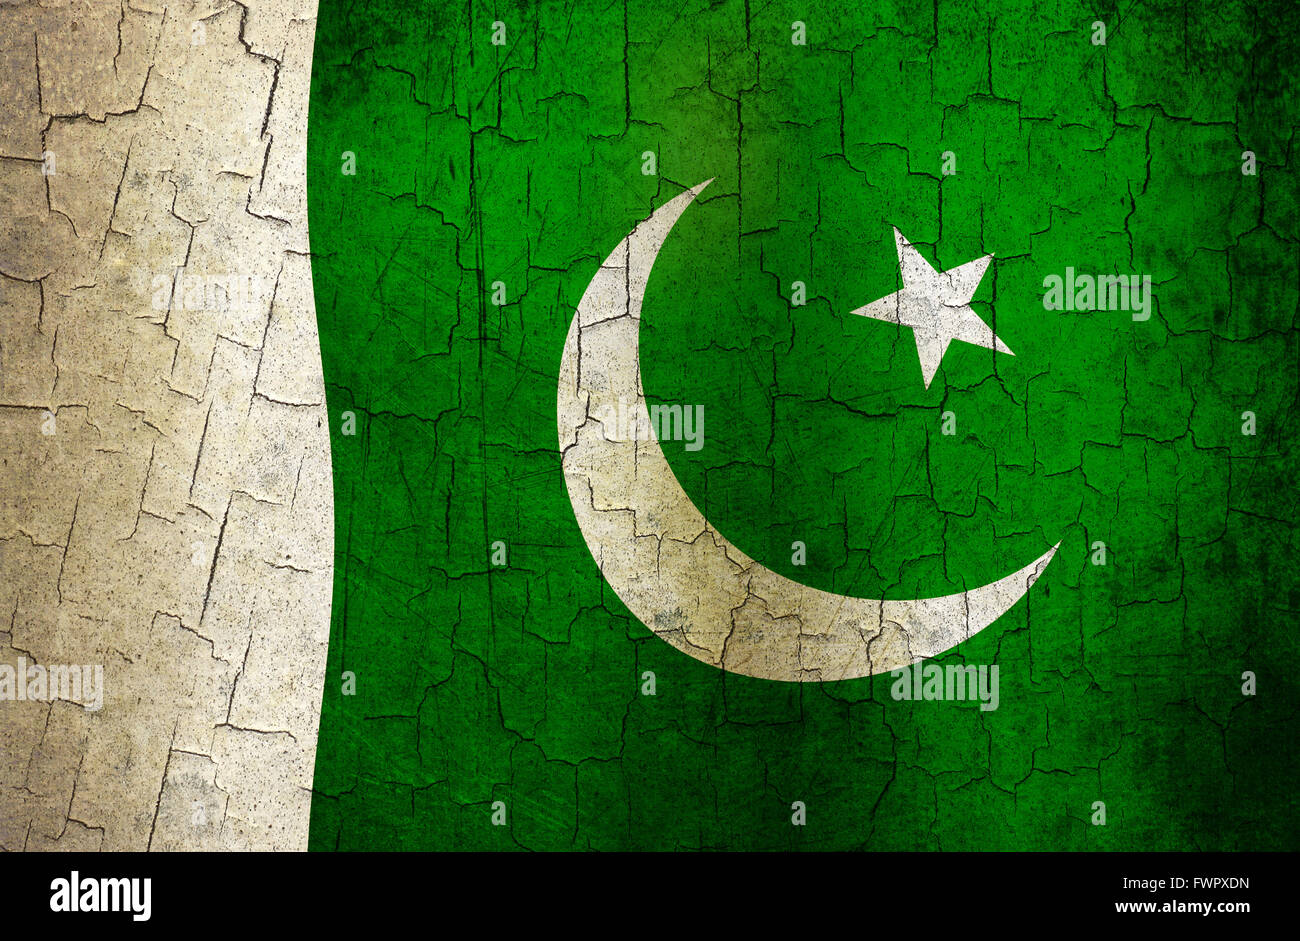 Pakistani flag on an old cracked wall Stock Photo